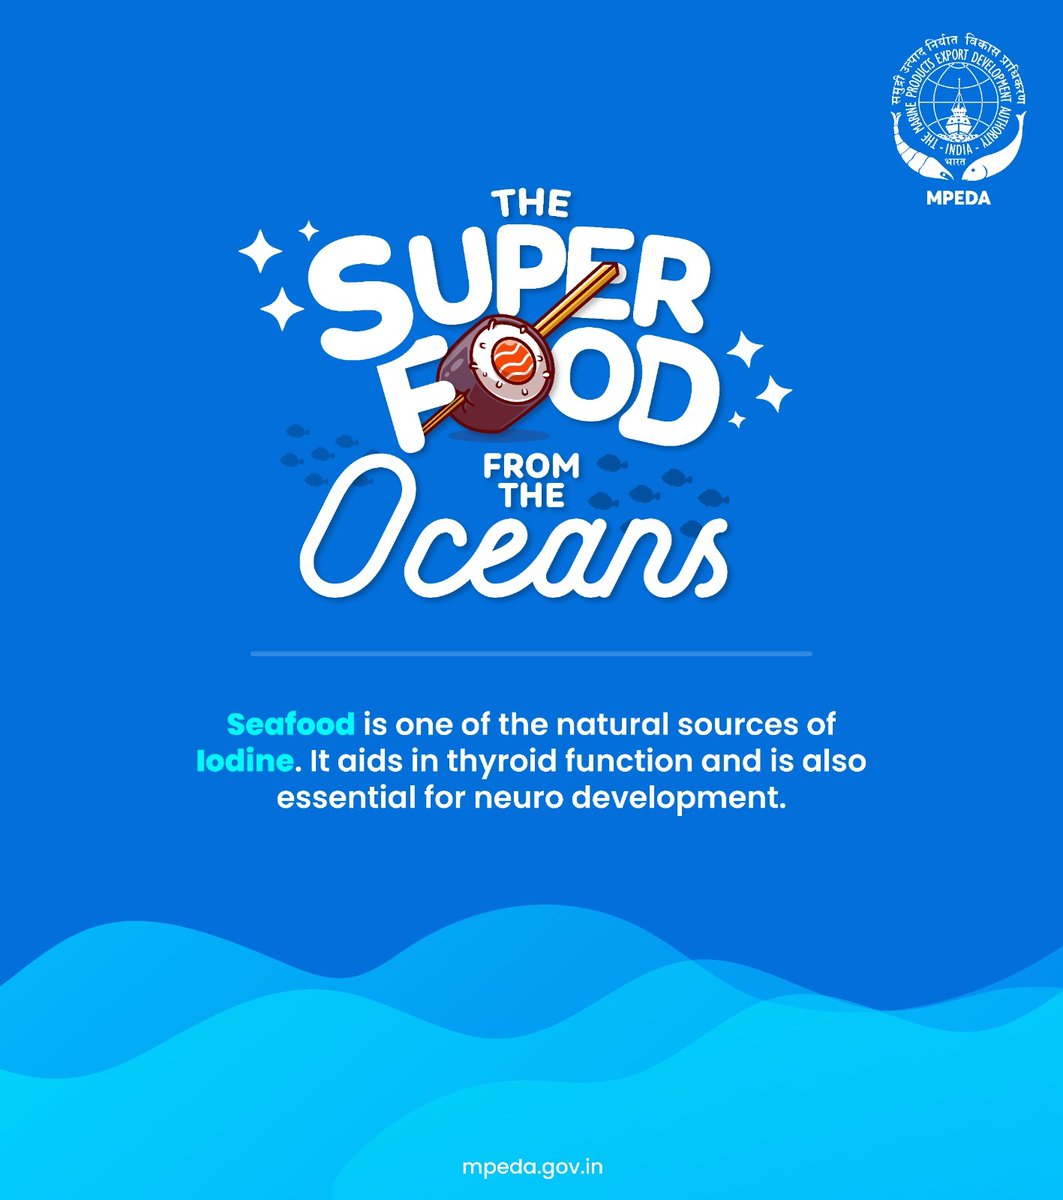 Enhance your well-being by adding seafood, including fish and shellfish, in your meals at least twice a week. Seafood encompasses all the essential components that your body requires for optimal wellness.
#MPEDA #seafood #exporters 
@DoC_GoI
@FisheriesGoI
@Min_FAHD
@MOFPI_GOI